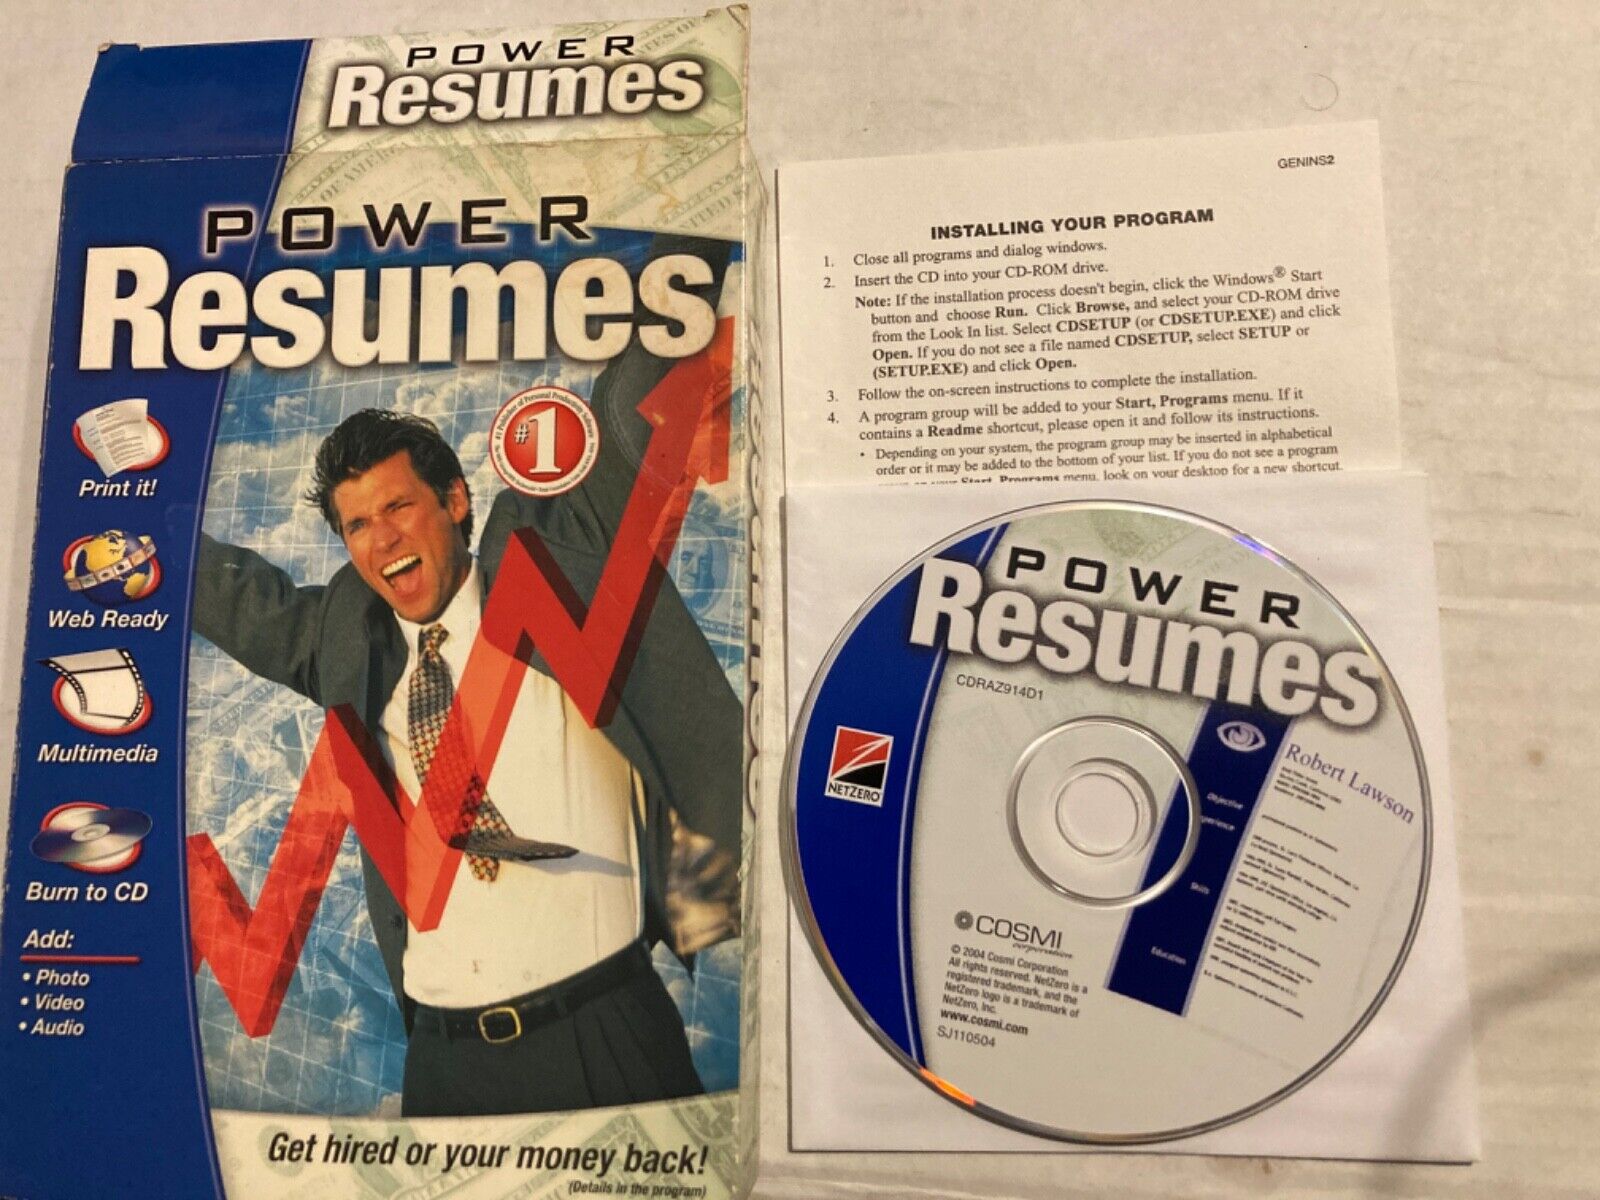 Power Resumes: Get hired or your money back(PC, 2004, Cosmi)